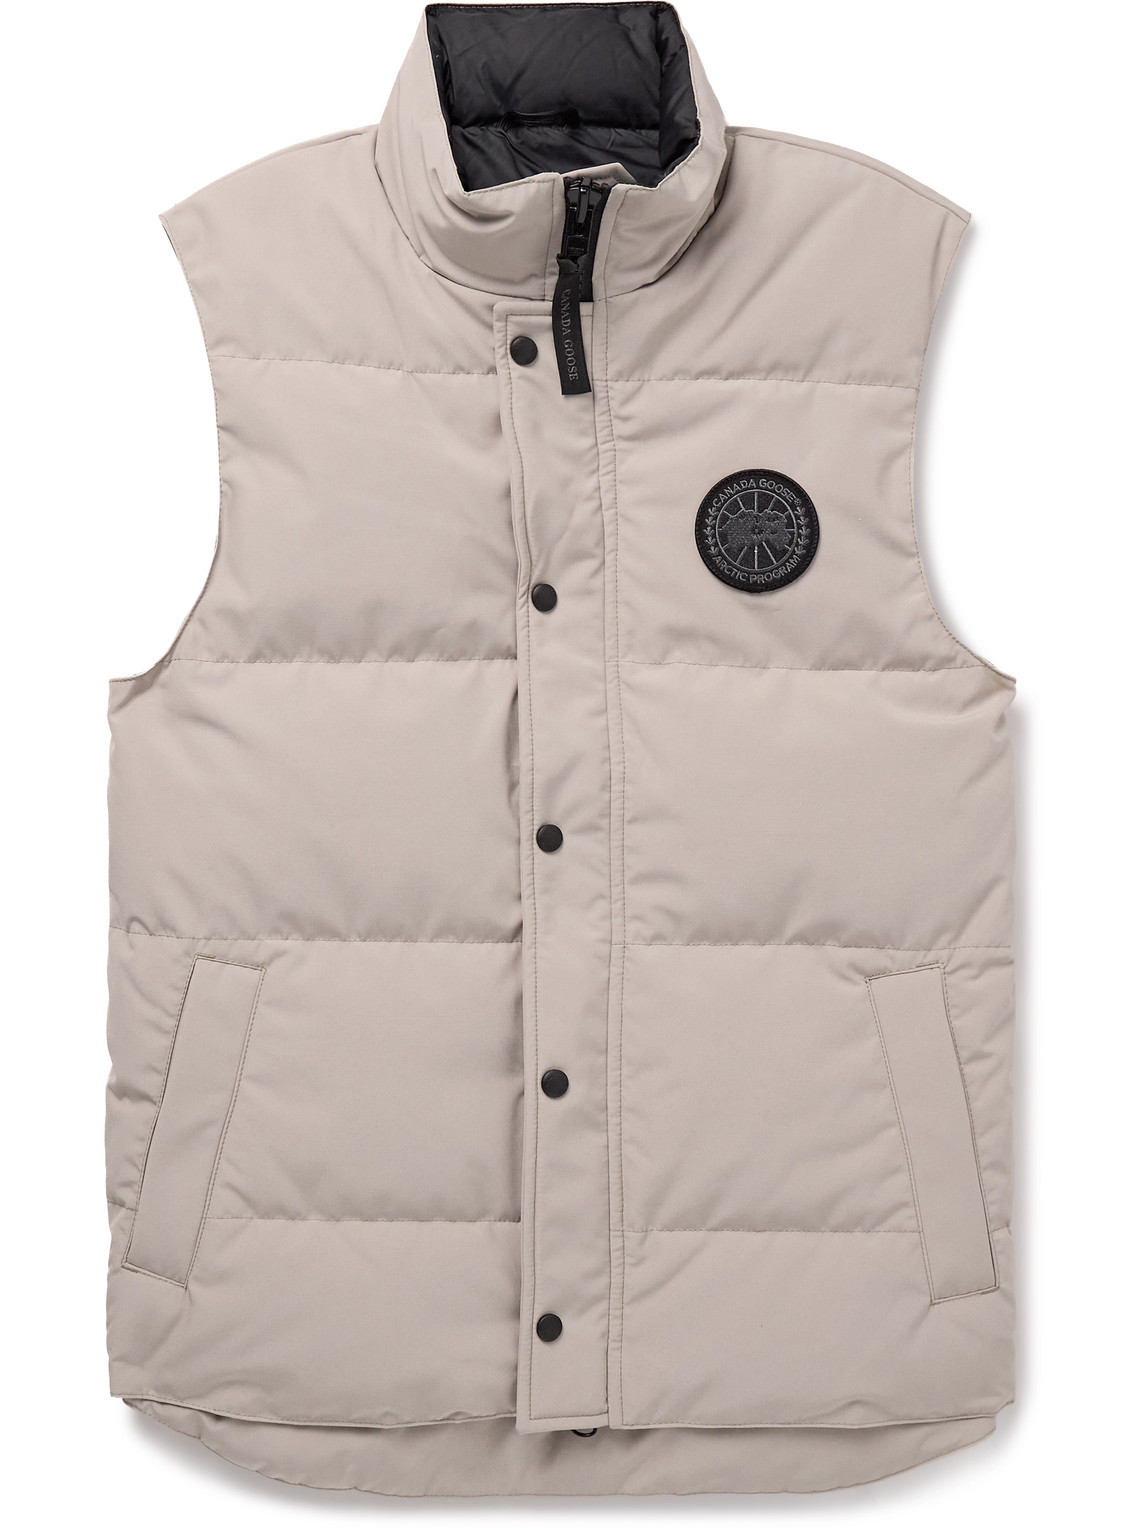 CANADA GOOSE BLACK LABEL GARSON QUILTED SHELL DOWN GILET